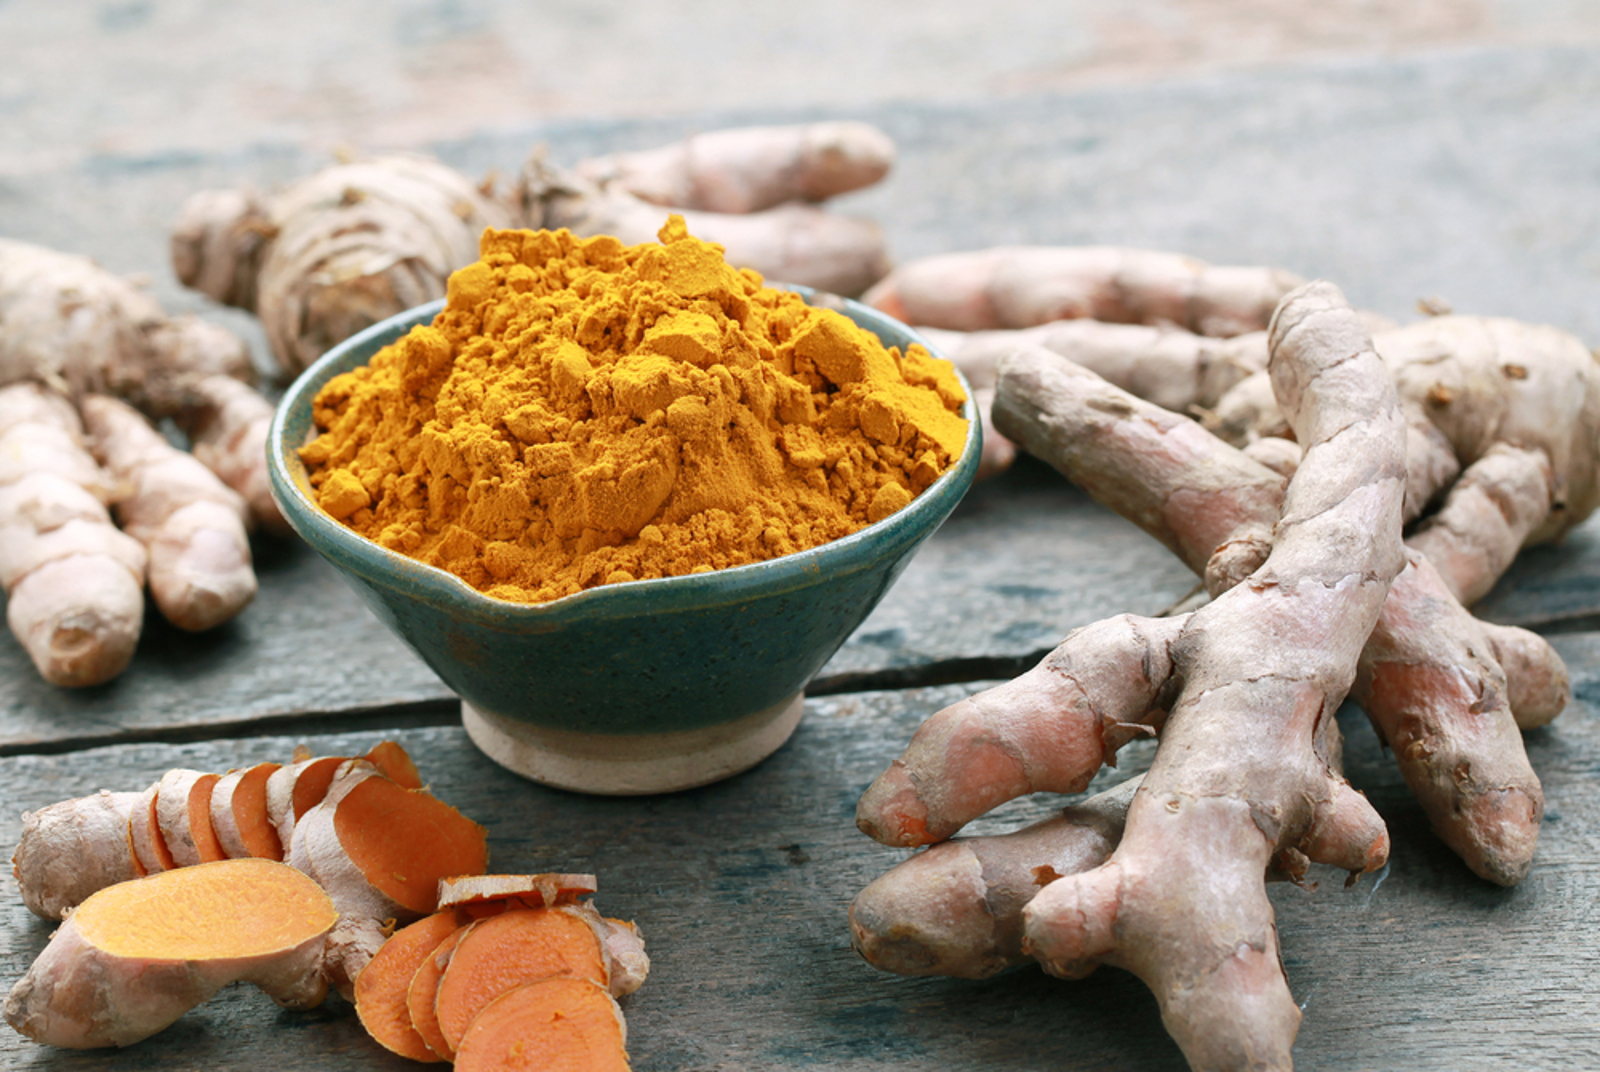 Tips and Tricks to Use Turmeric in the Kitchen